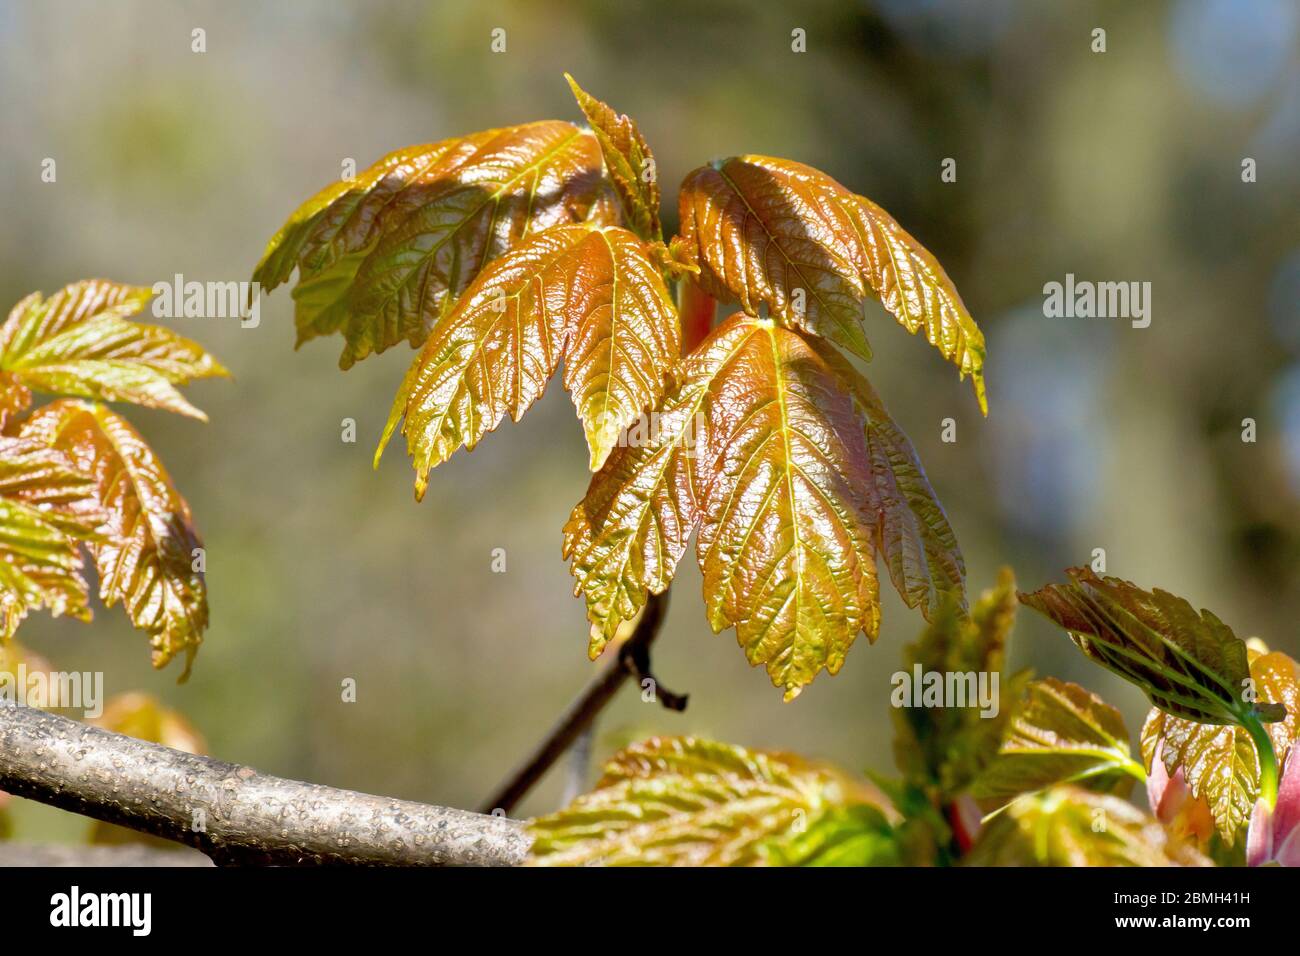 Sycamore (acer pseudoplatanus), close up of the leaves as they begin to appear on the trees in spring. Stock Photo